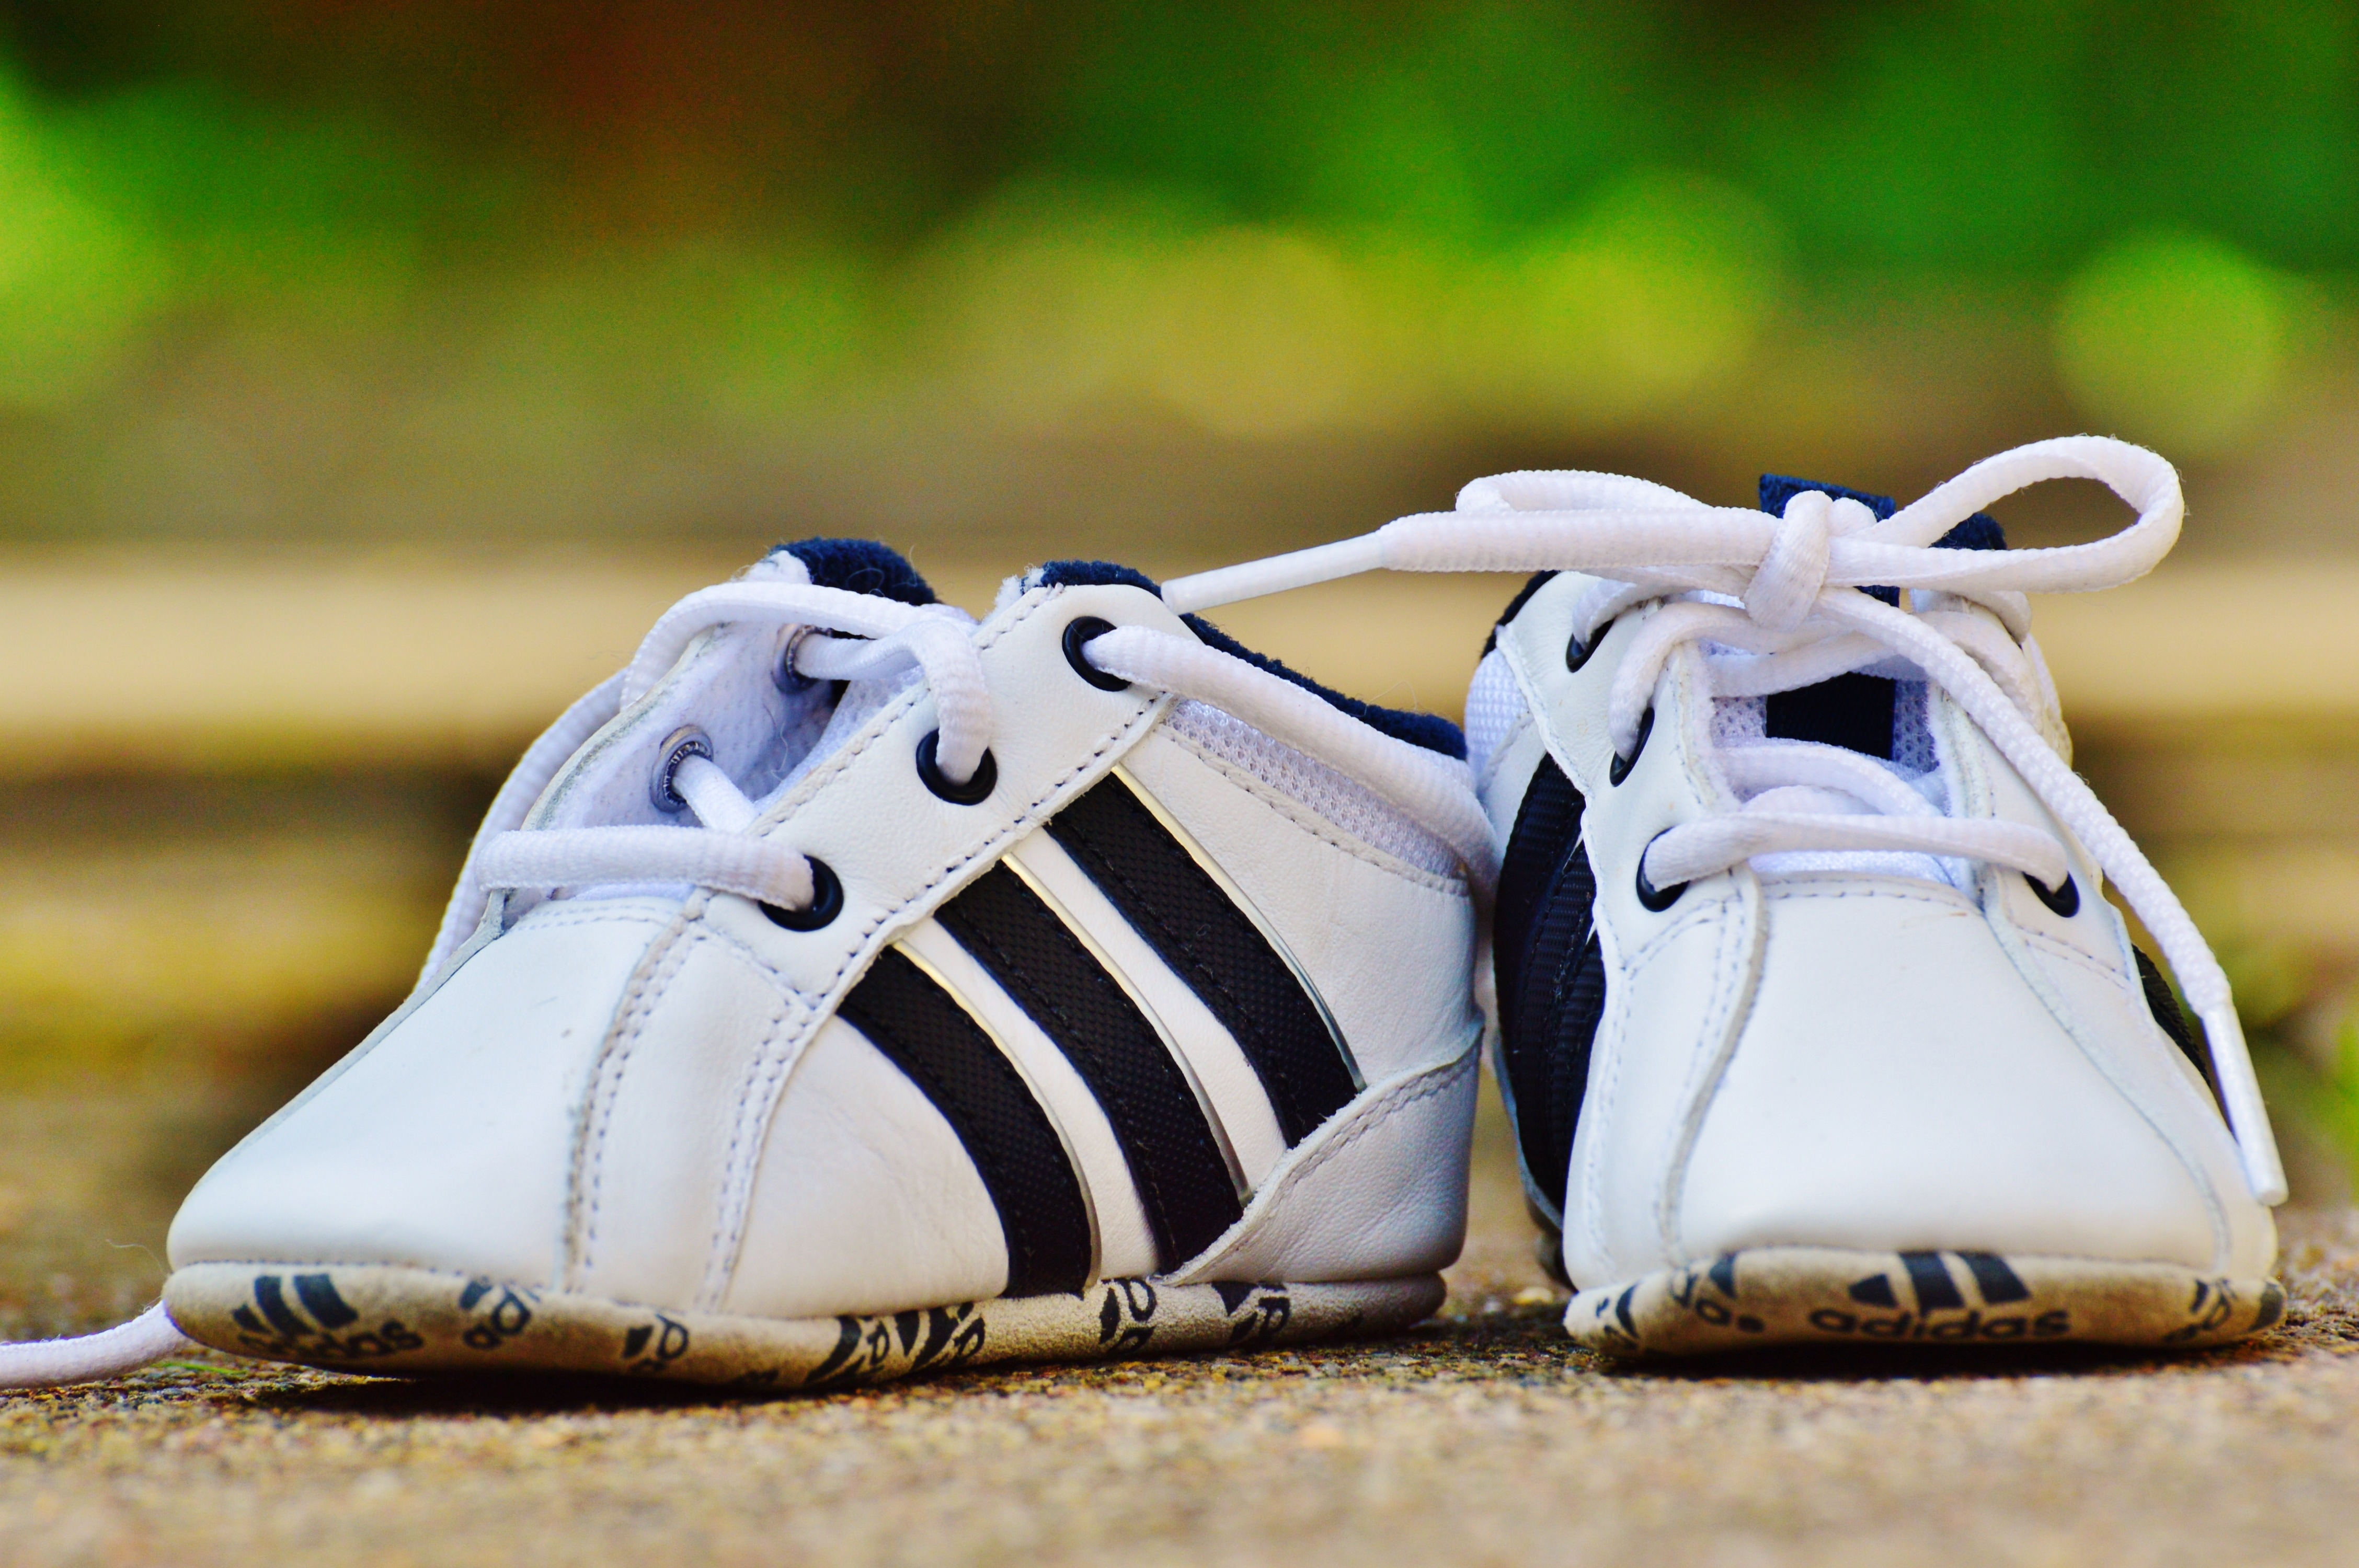 Toddler S White And Black Adidas Shoes - Zapatos De Bebe Sports - HD Wallpaper 